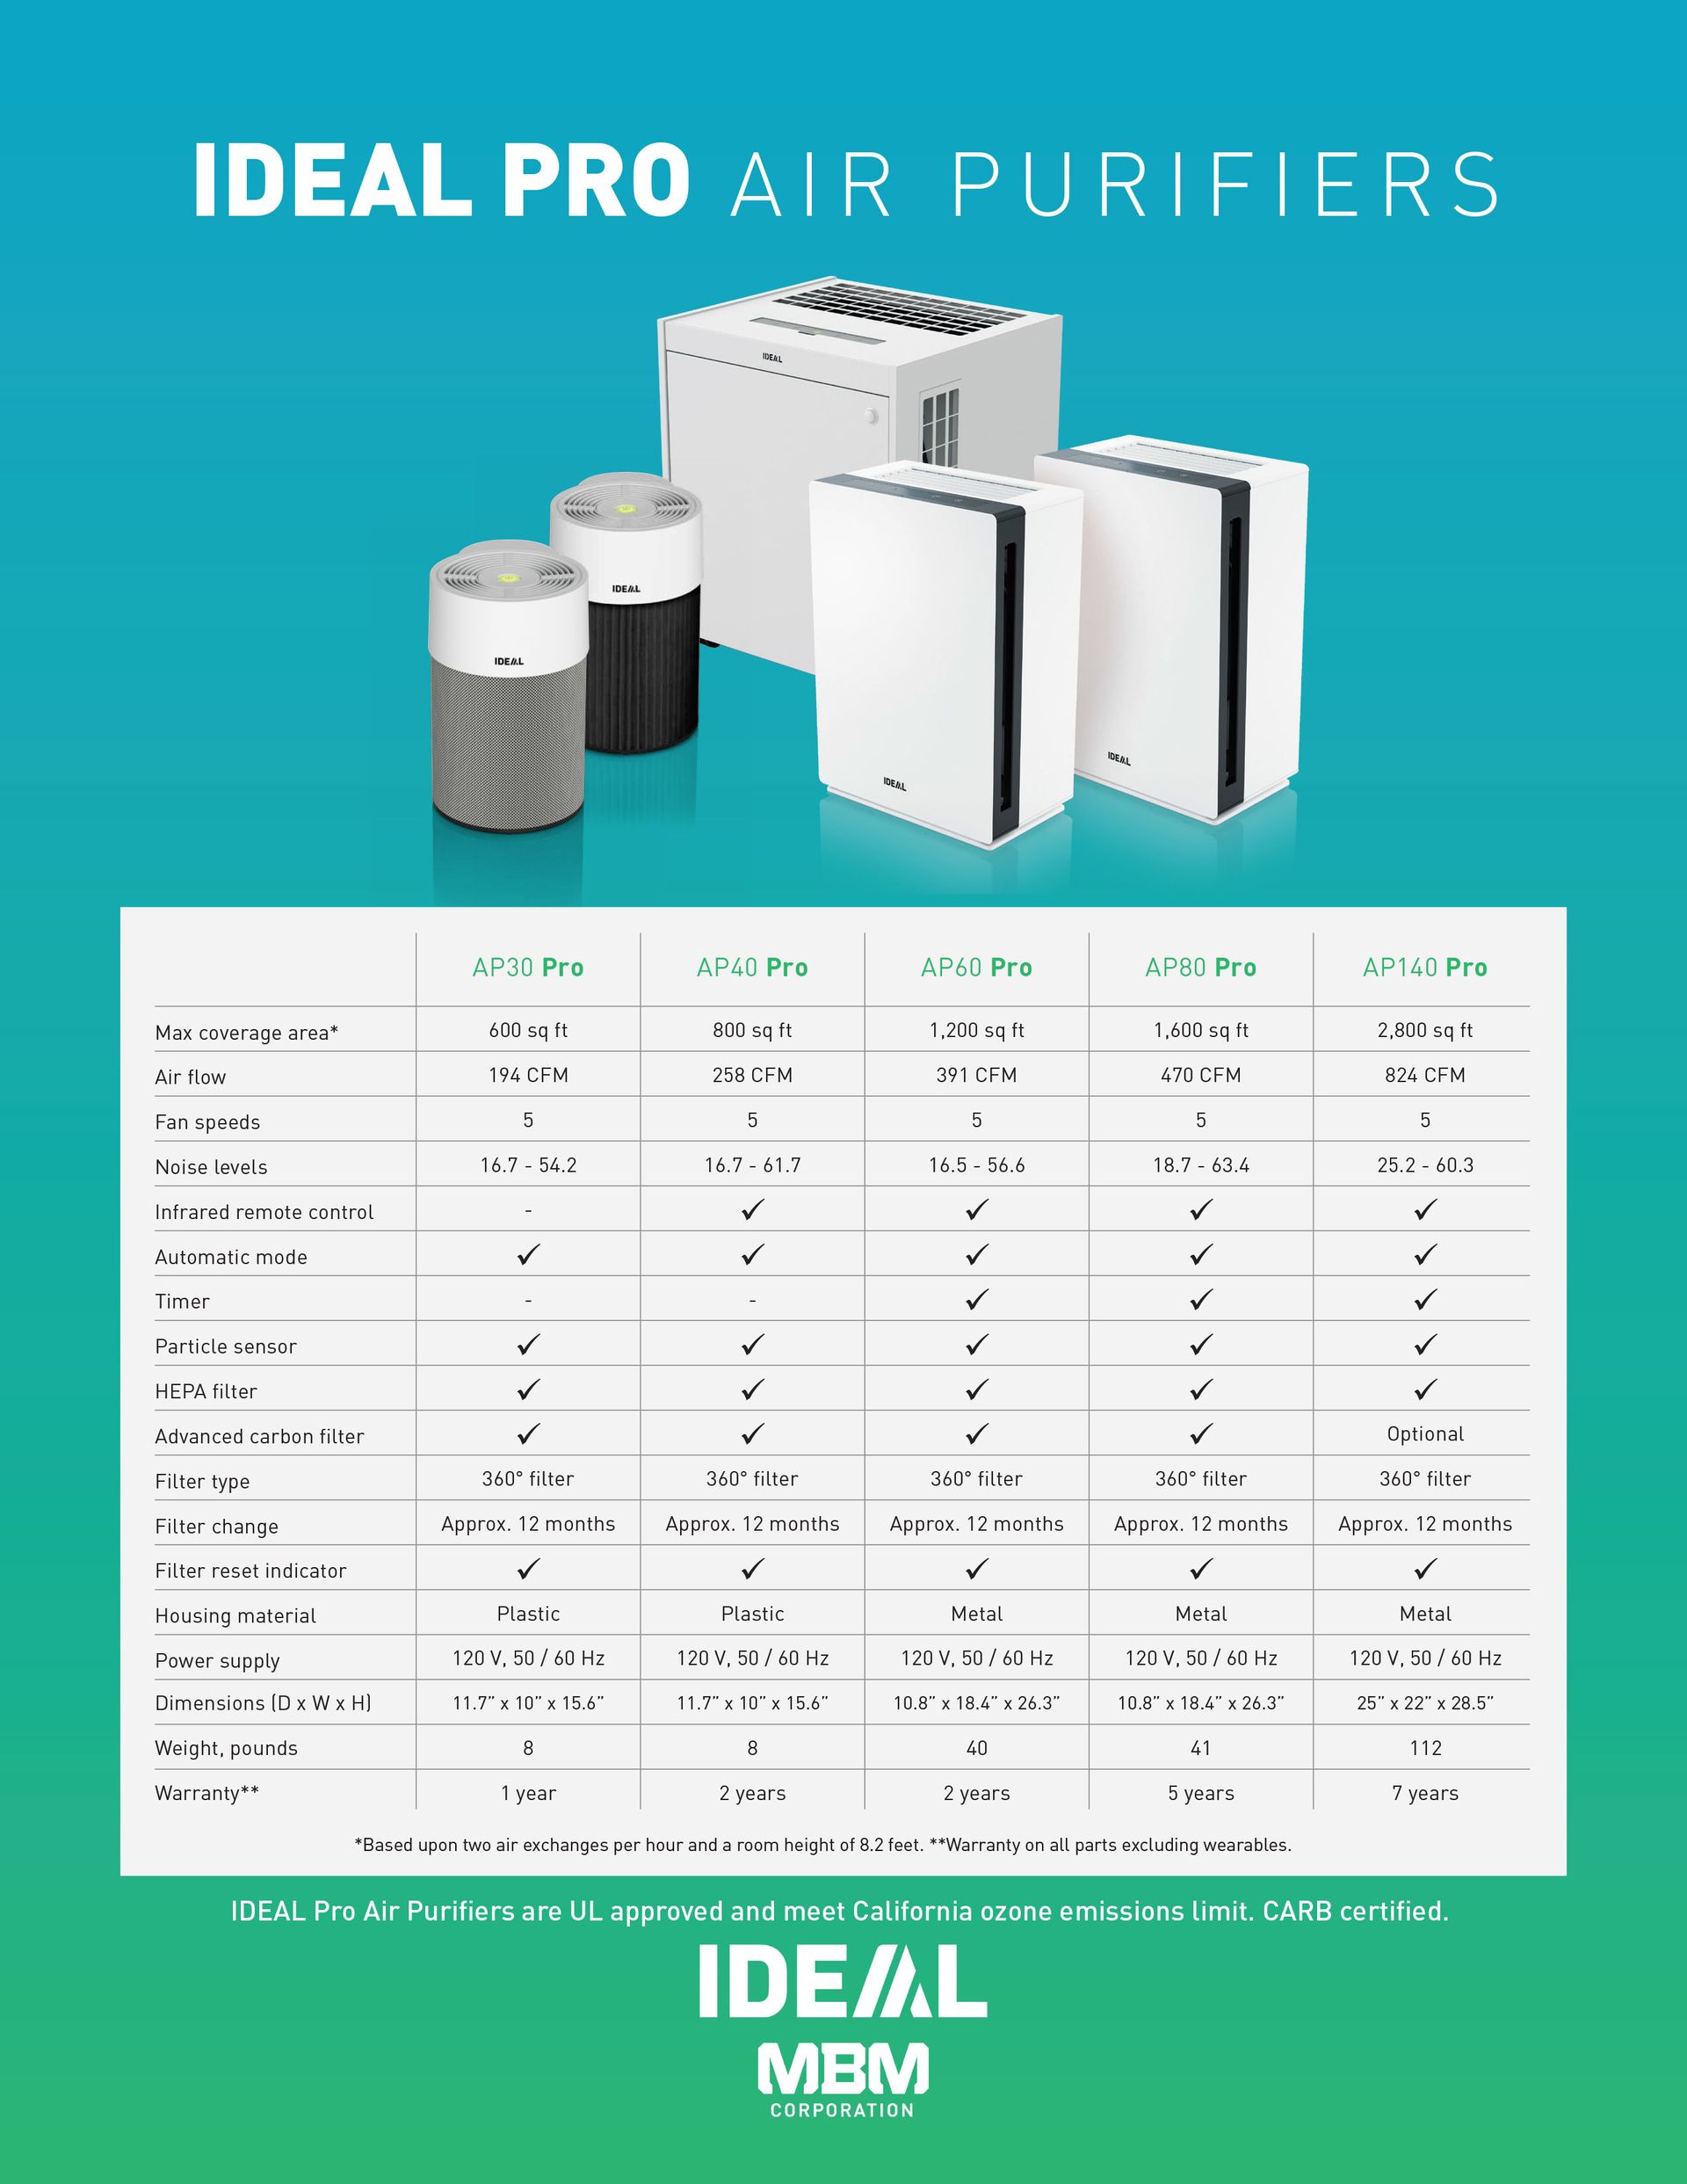 IDEAL Pro air purifiers